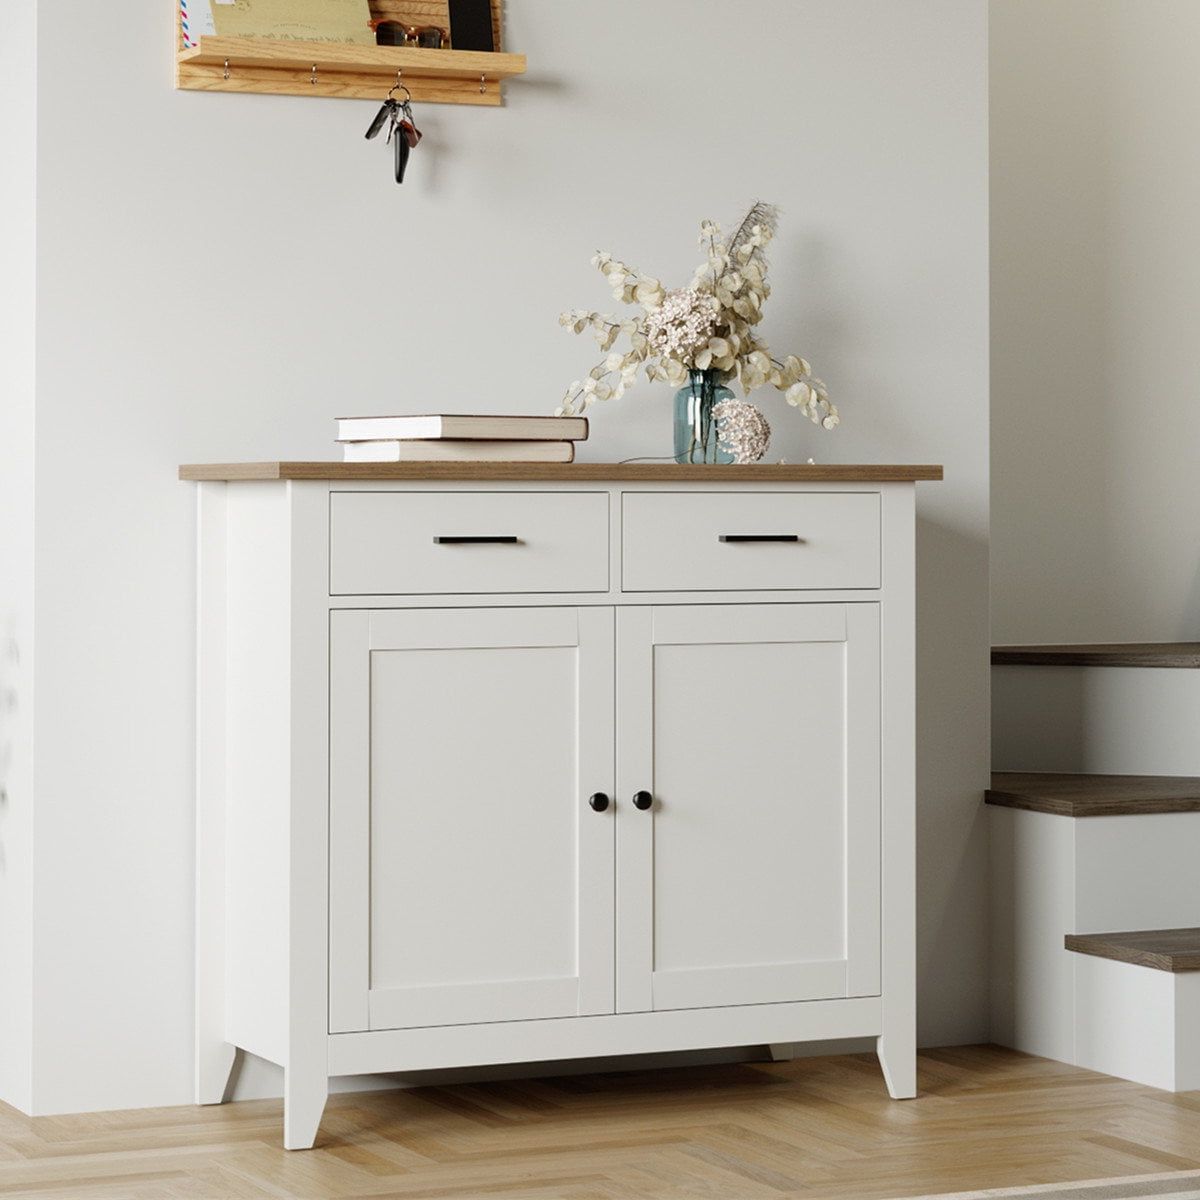 Homfa Entryway Storage Cabinet, Sideboard With 2 Drawers For Kitchen Living  Room, White – Walmart Inside Sideboards For Entryway (Gallery 6 of 20)